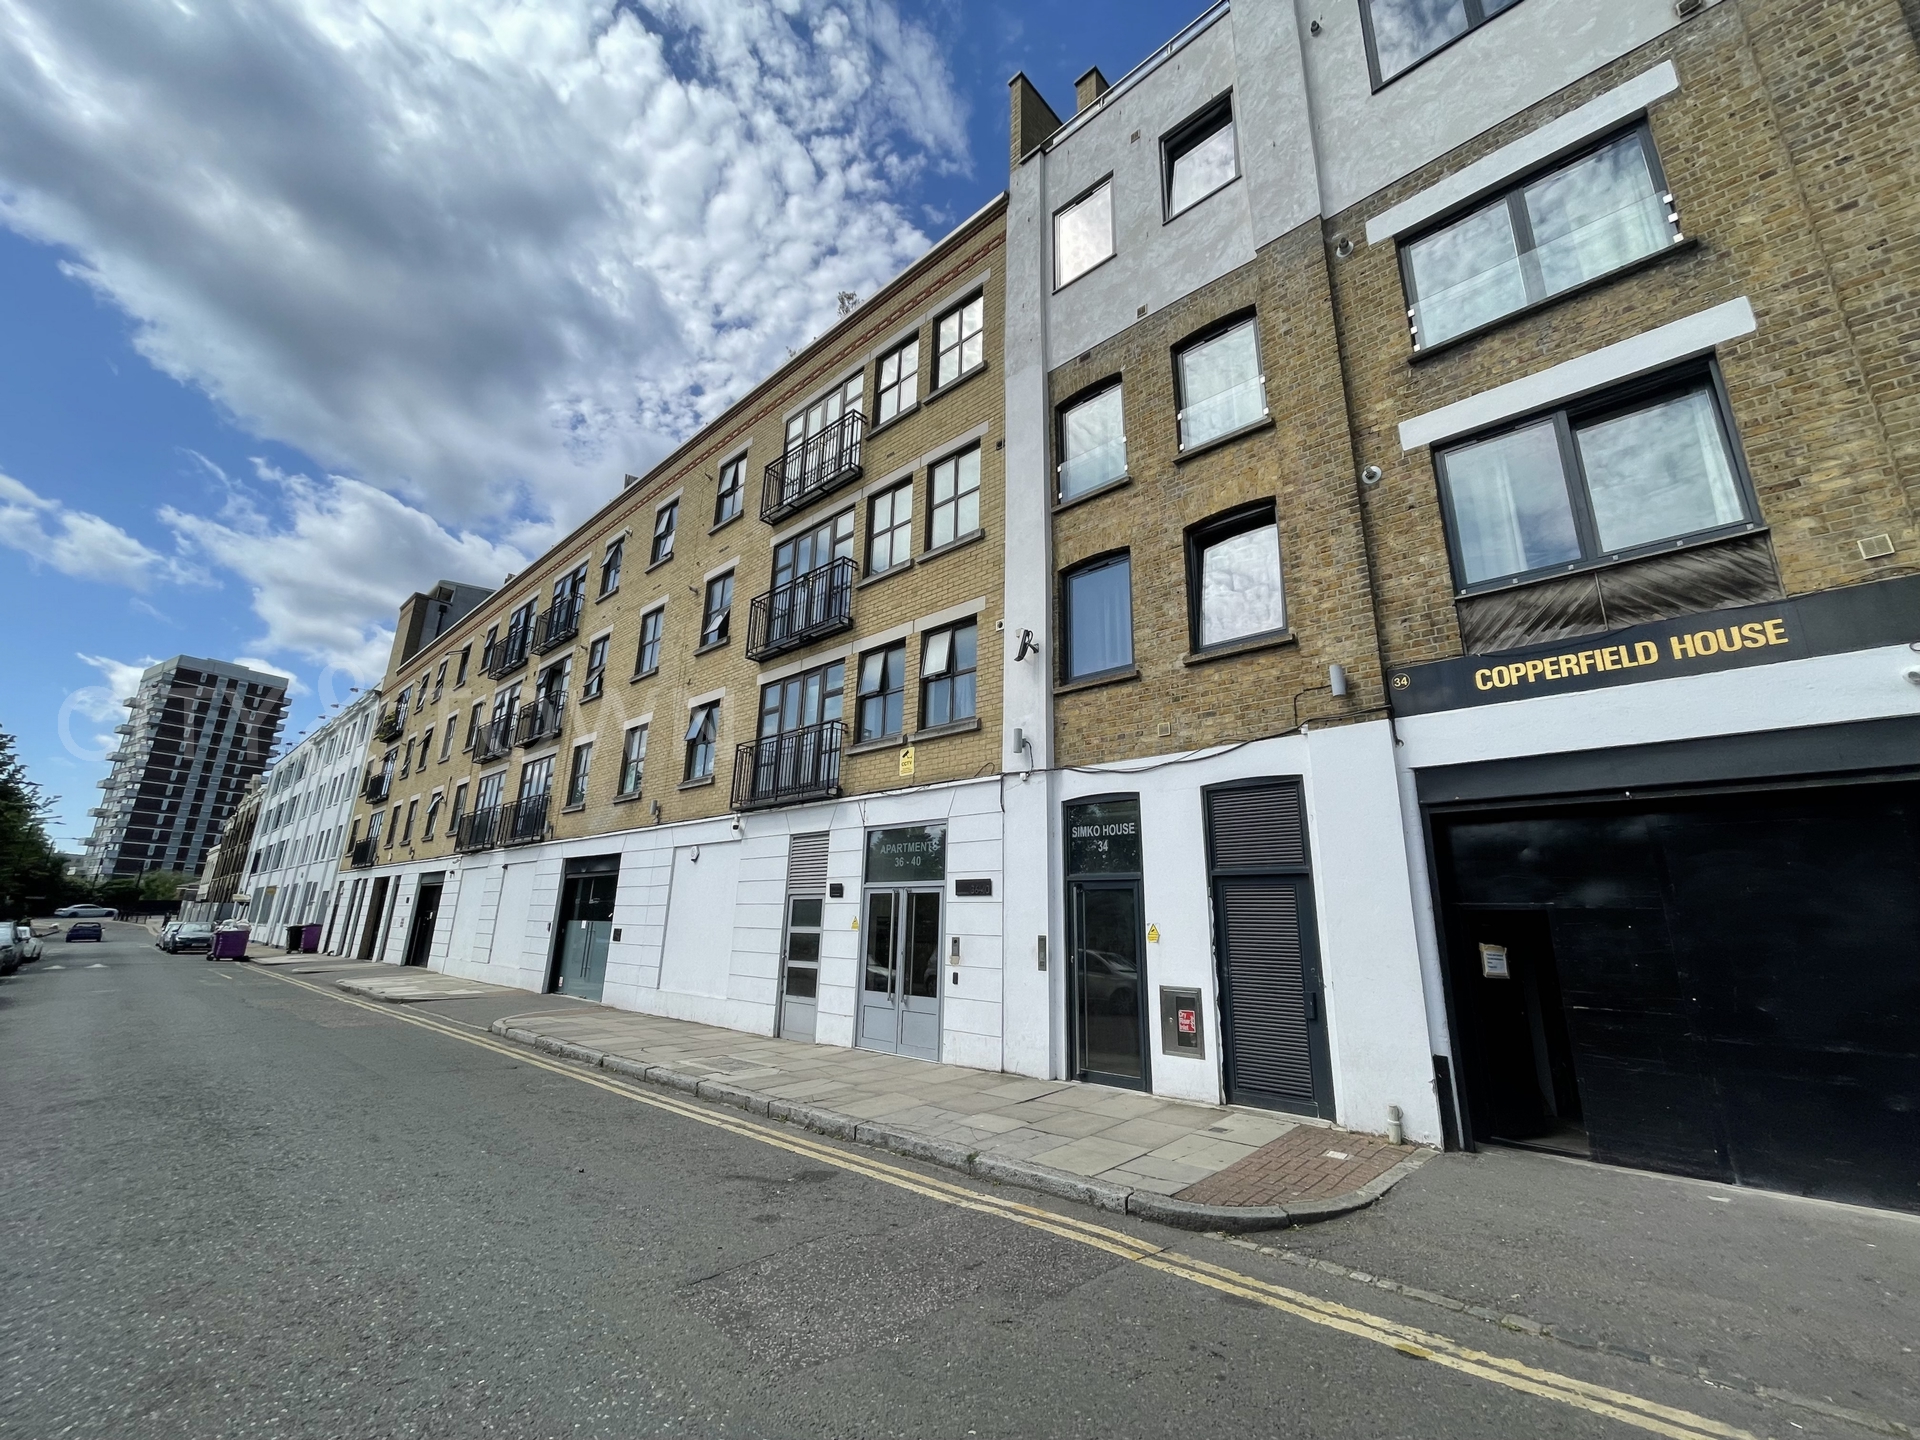 Copperfield Road  Mile End - Limehouse  E3